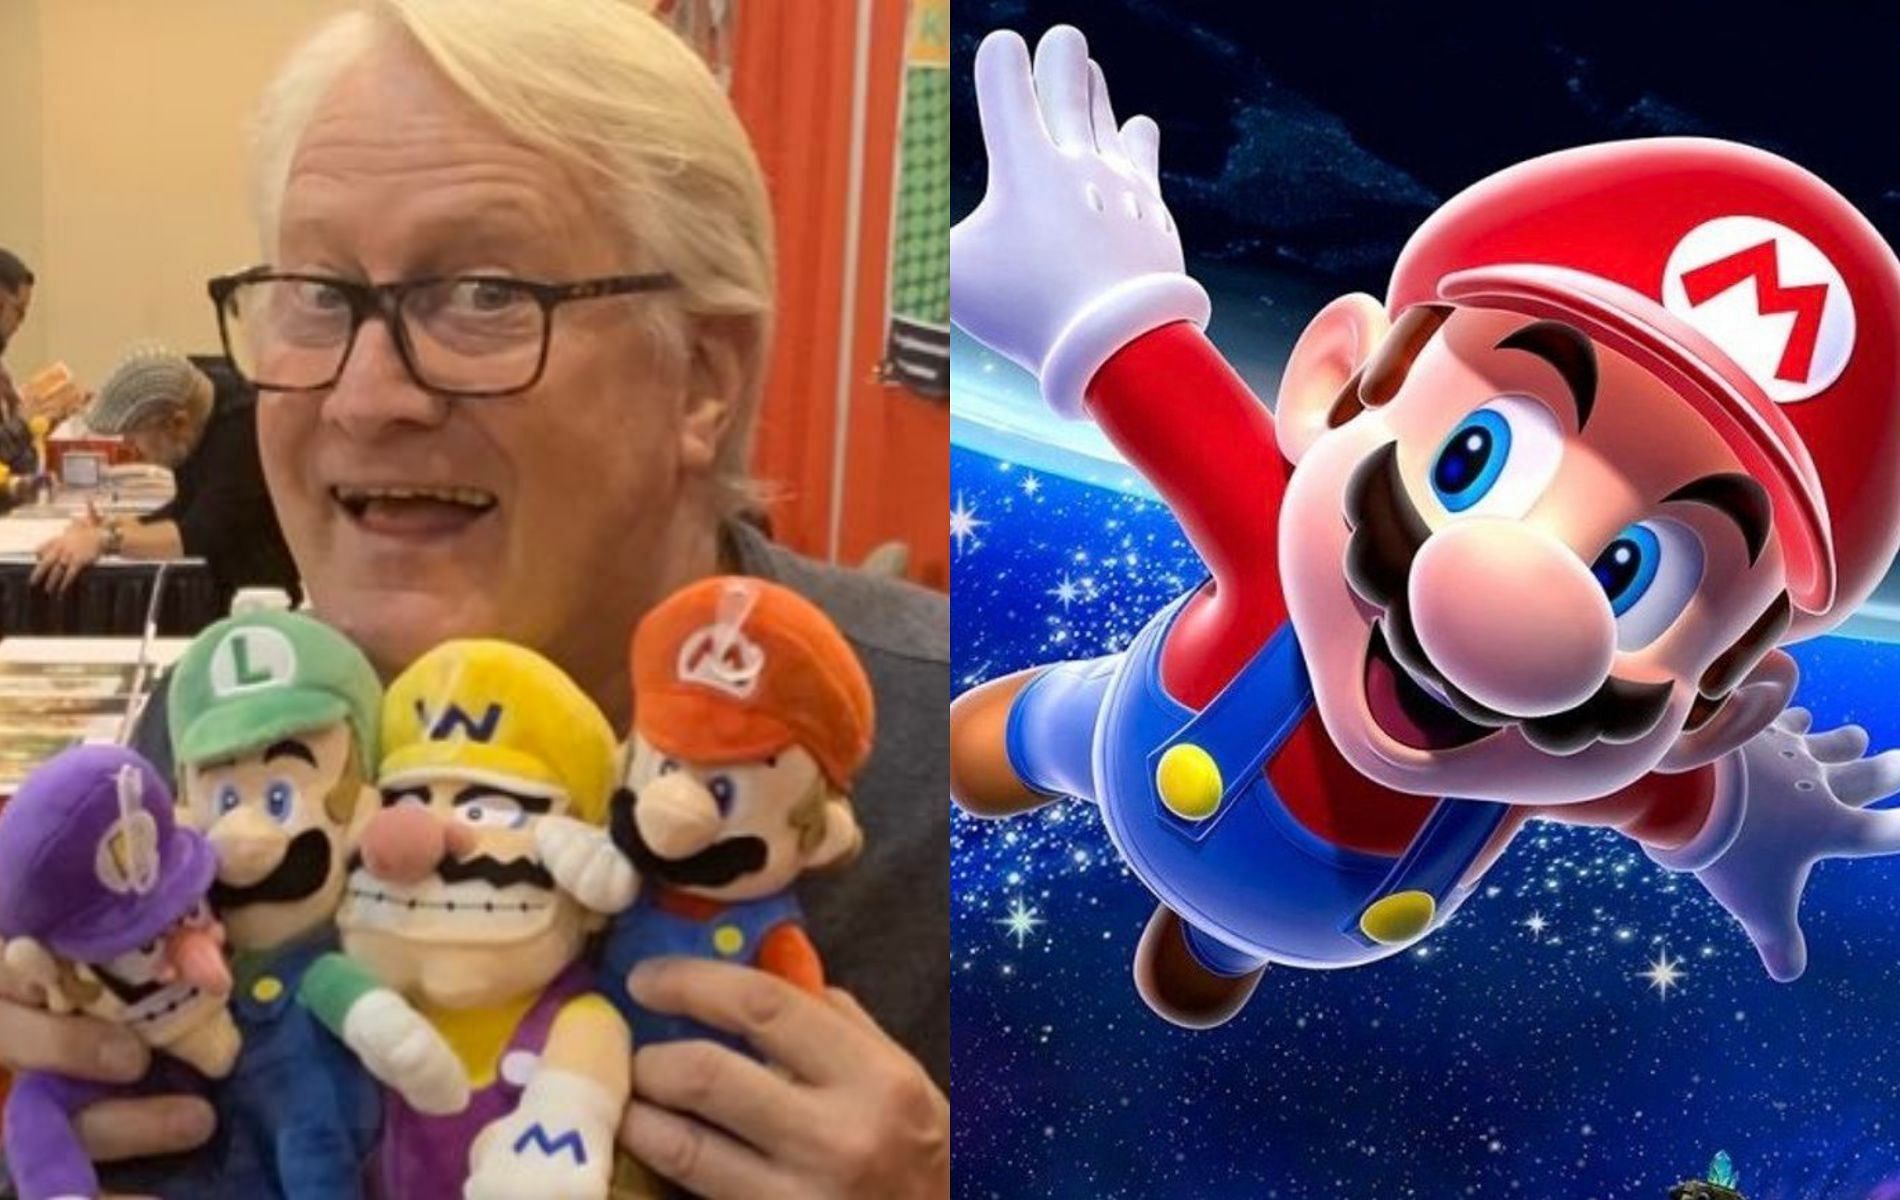 Cover art featuring Mario voice actor Charles Martinet and feature art for Super Mario Galaxy